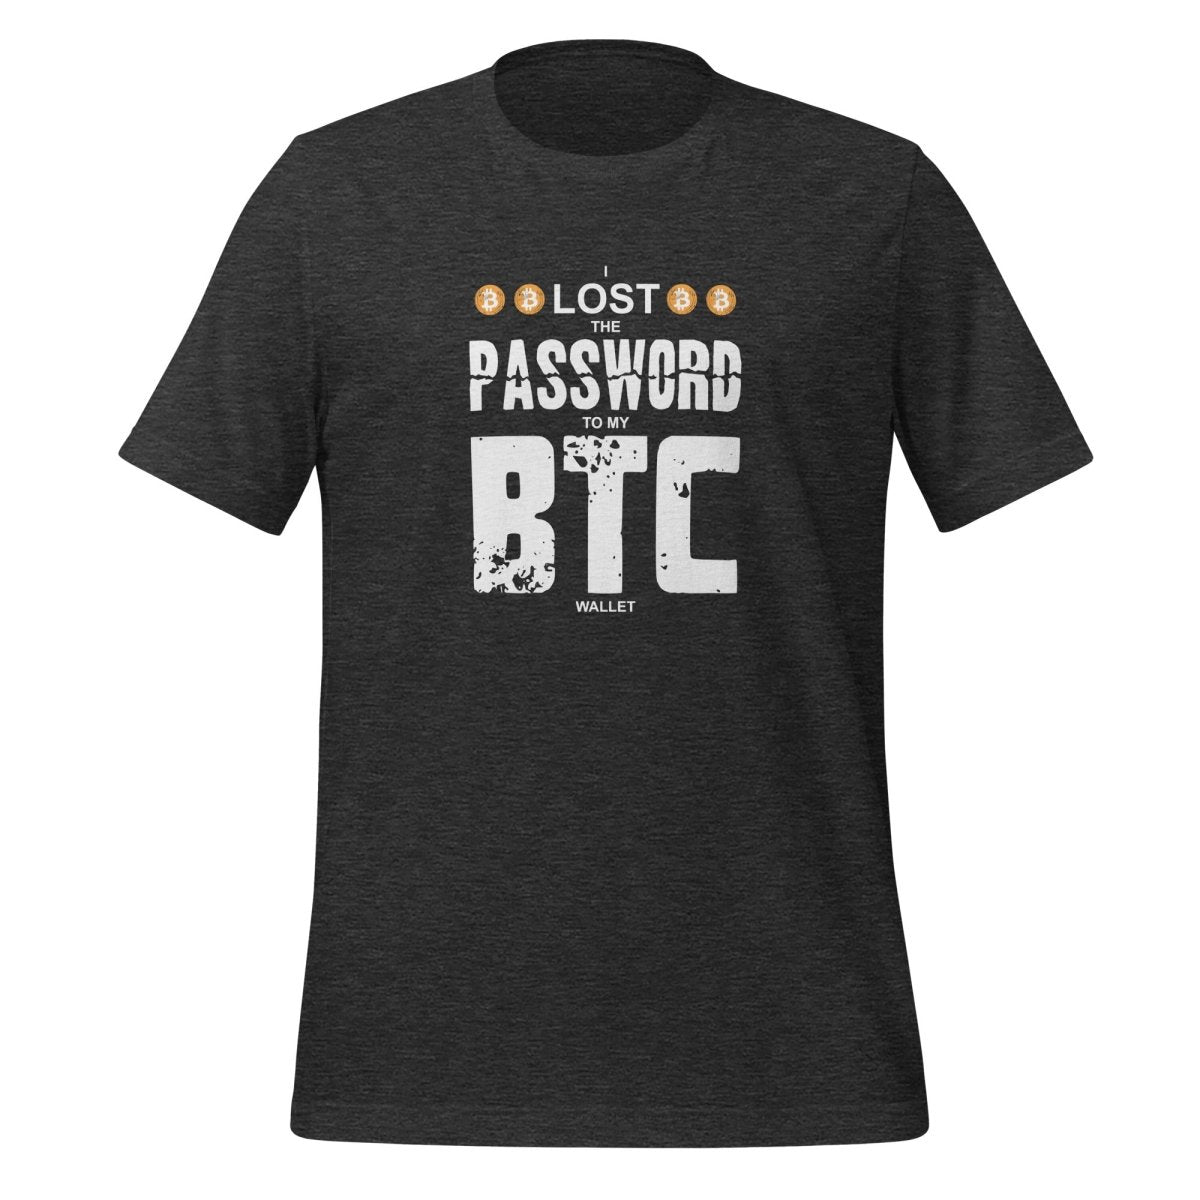 I Lost the Password to my Bitcoin Wallet T - Shirt (unisex) - Dark Grey Heather - AI Store